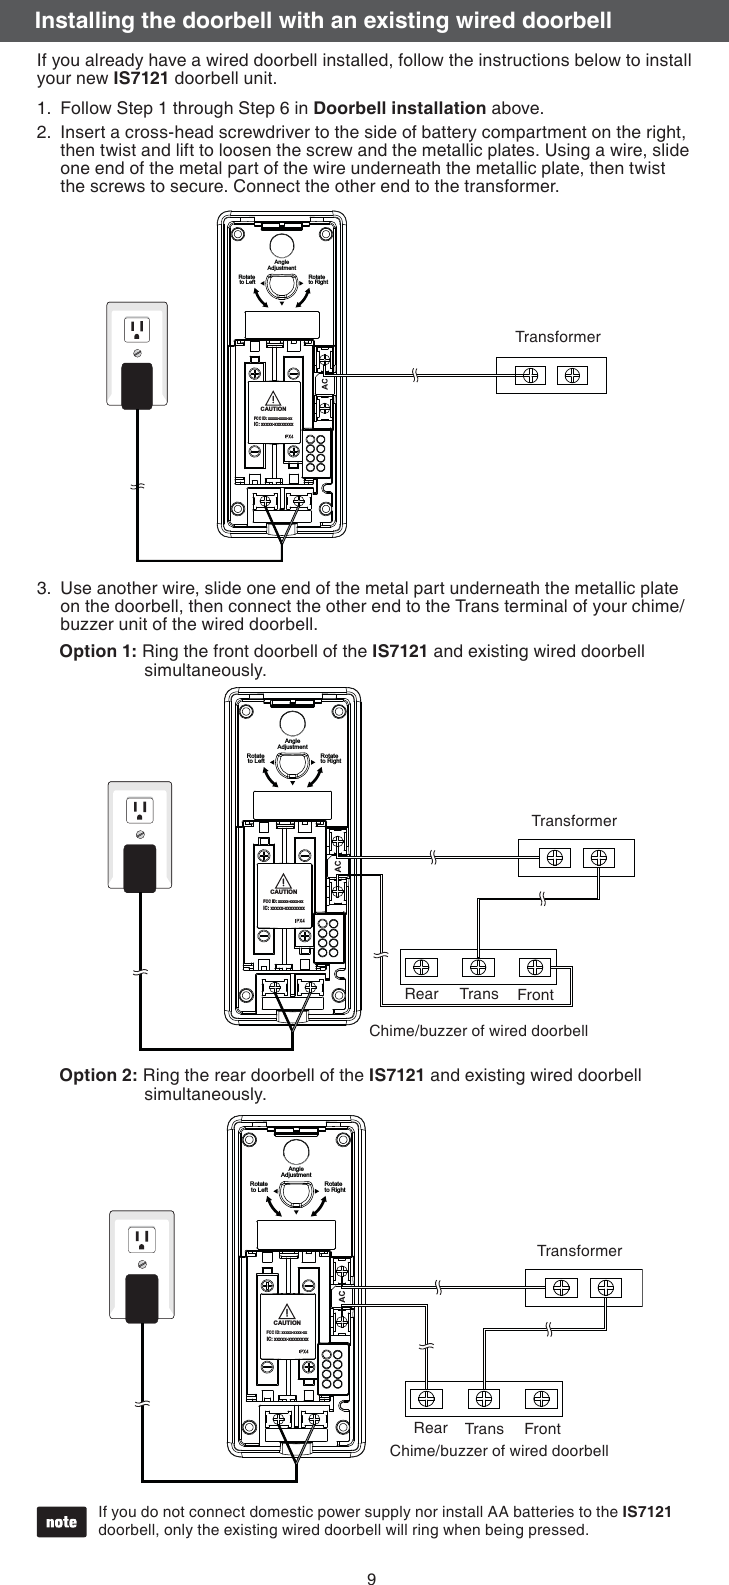 9If you already have a wired doorbell installed, follow the instructions below to install your new IS7121 doorbell unit.Follow Step 1 through Step 6 in Doorbell installation above.Insert a cross-head screwdriver to the side of battery compartment on the right, then twist and lift to loosen the screw and the metallic plates. Using a wire, slide one end of the metal part of the wire underneath the metallic plate, then twist the screws to secure. Connect the other end to the transformer.1.2.Use another wire, slide one end of the metal part underneath the metallic plate on the doorbell, then connect the other end to the Trans terminal of your chime/buzzer unit of the wired doorbell.3.If you do not connect domestic power supply nor install AA batteries to the IS7121 doorbell, only the existing wired doorbell will ring when being pressed.•CAUTIONFCC ID: xxxxx-xxxx-xxIC: xxxxx-xxxxxxxxRotateto LeftAngleAdjustmentRotateto RightTransformerTransformerOption 1: Ring the front doorbell of the IS7121 and existing wired doorbell        simultaneously.Option 2: Ring the rear doorbell of the IS7121 and existing wired doorbell       simultaneously. Rear Trans FrontCAUTIONFCC ID: xxxxx-xxxx-xxIC: xxxxx-xxxxxxxxRotateto LeftAngleAdjustmentRotateto RightTransformerChime/buzzer of wired doorbellChime/buzzer of wired doorbellCAUTIONFCC ID: xxxxx-xxxx-xxIC: xxxxx-xxxxxxxxRotateto LeftAngleAdjustmentRotateto RightTransformerRear Trans FrontInstalling the doorbell with an existing wired doorbell